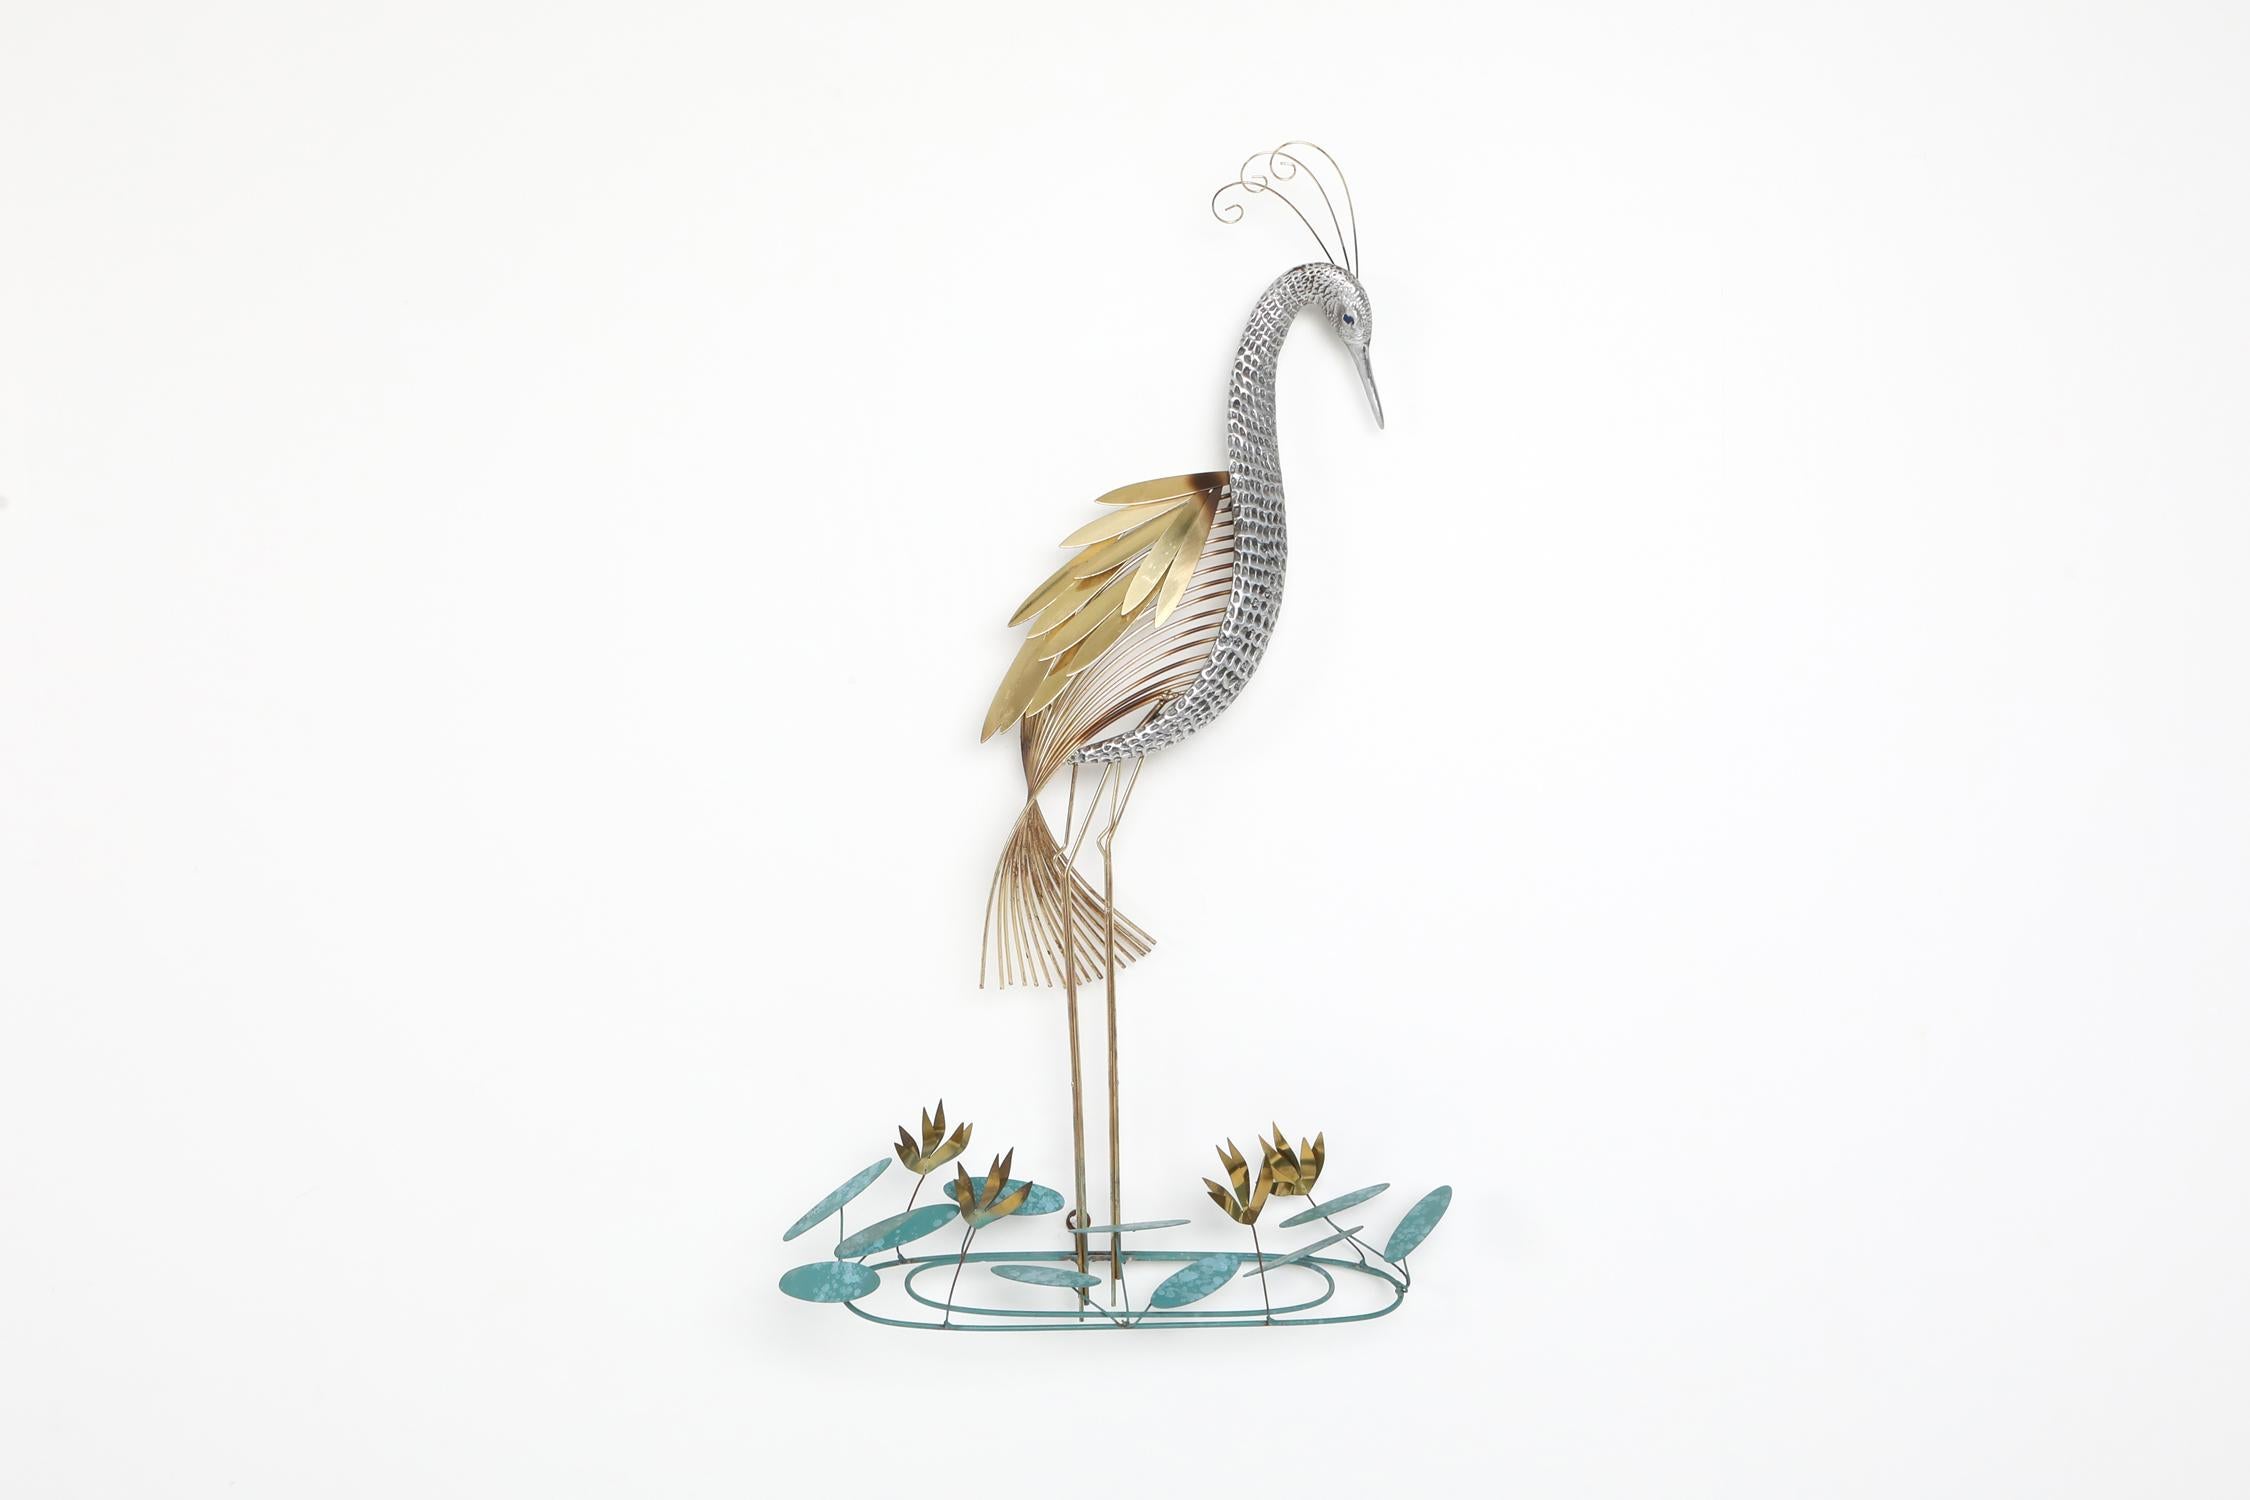 Wall sculpture 'Heron' by Curtis Jere, made out of brass and patinated brass.
Artisan House, USA, 1988.
Would fit well in an eclectic Hollywood Regency inspired interior.

 